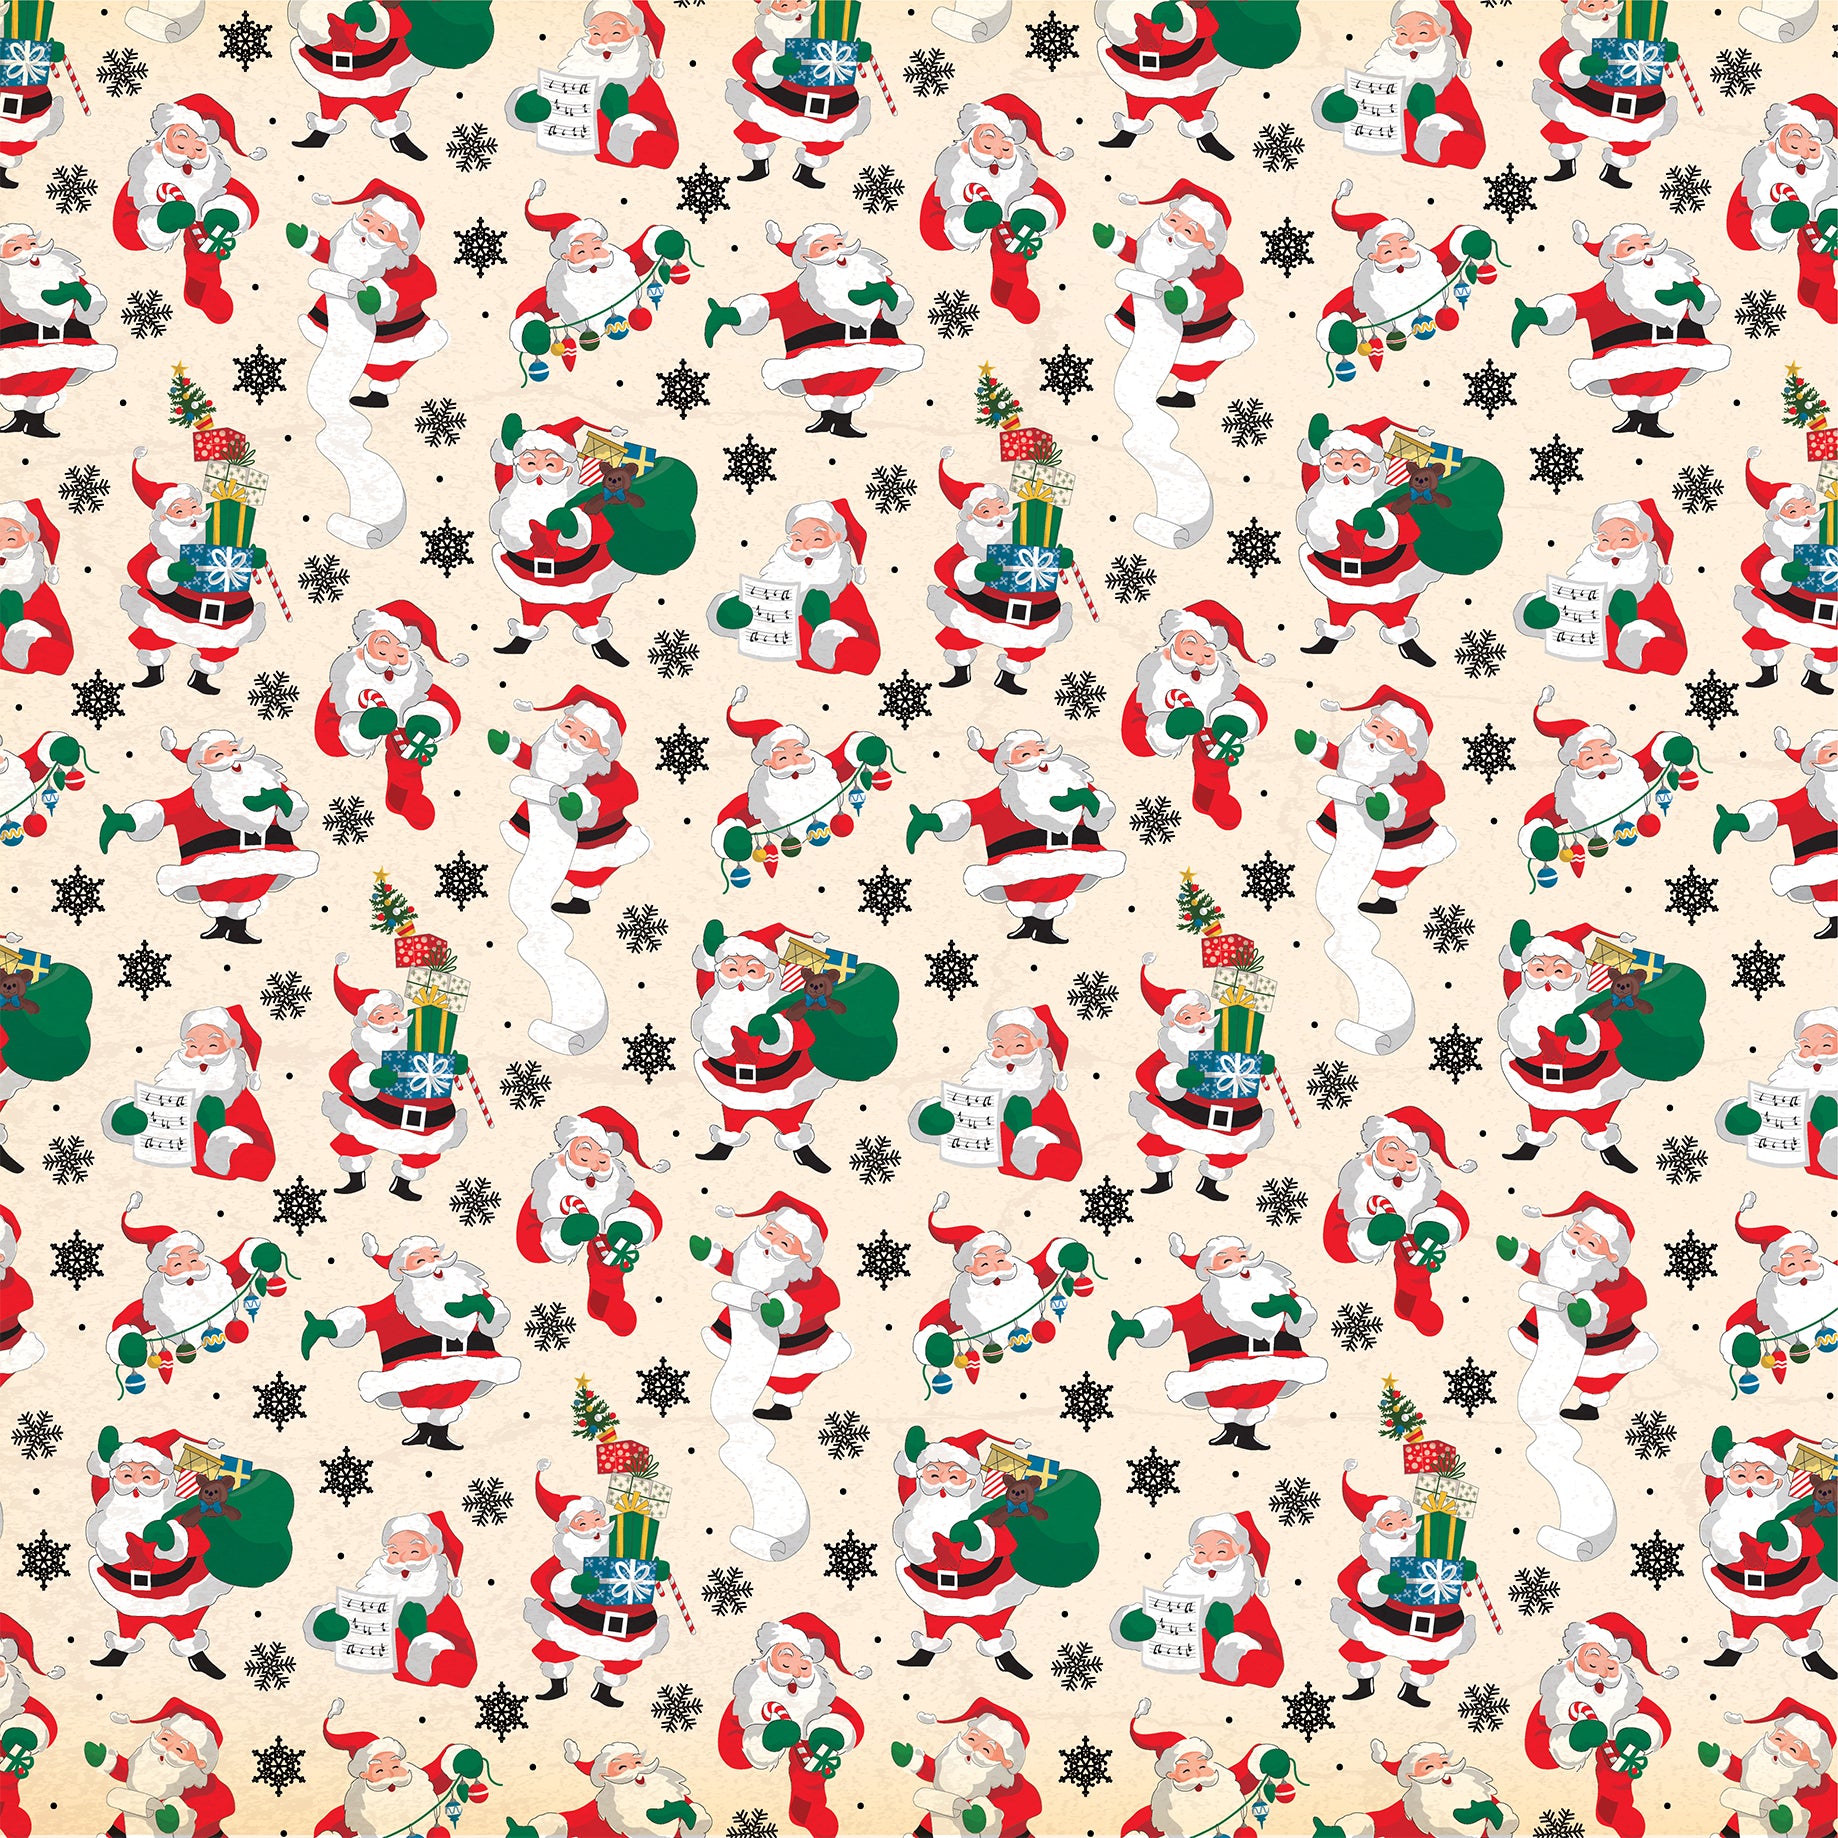 Season's Greetings Collection Christmas Is Coming 12 x 12 Double-Sided Scrapbook Paper by Carta Bella